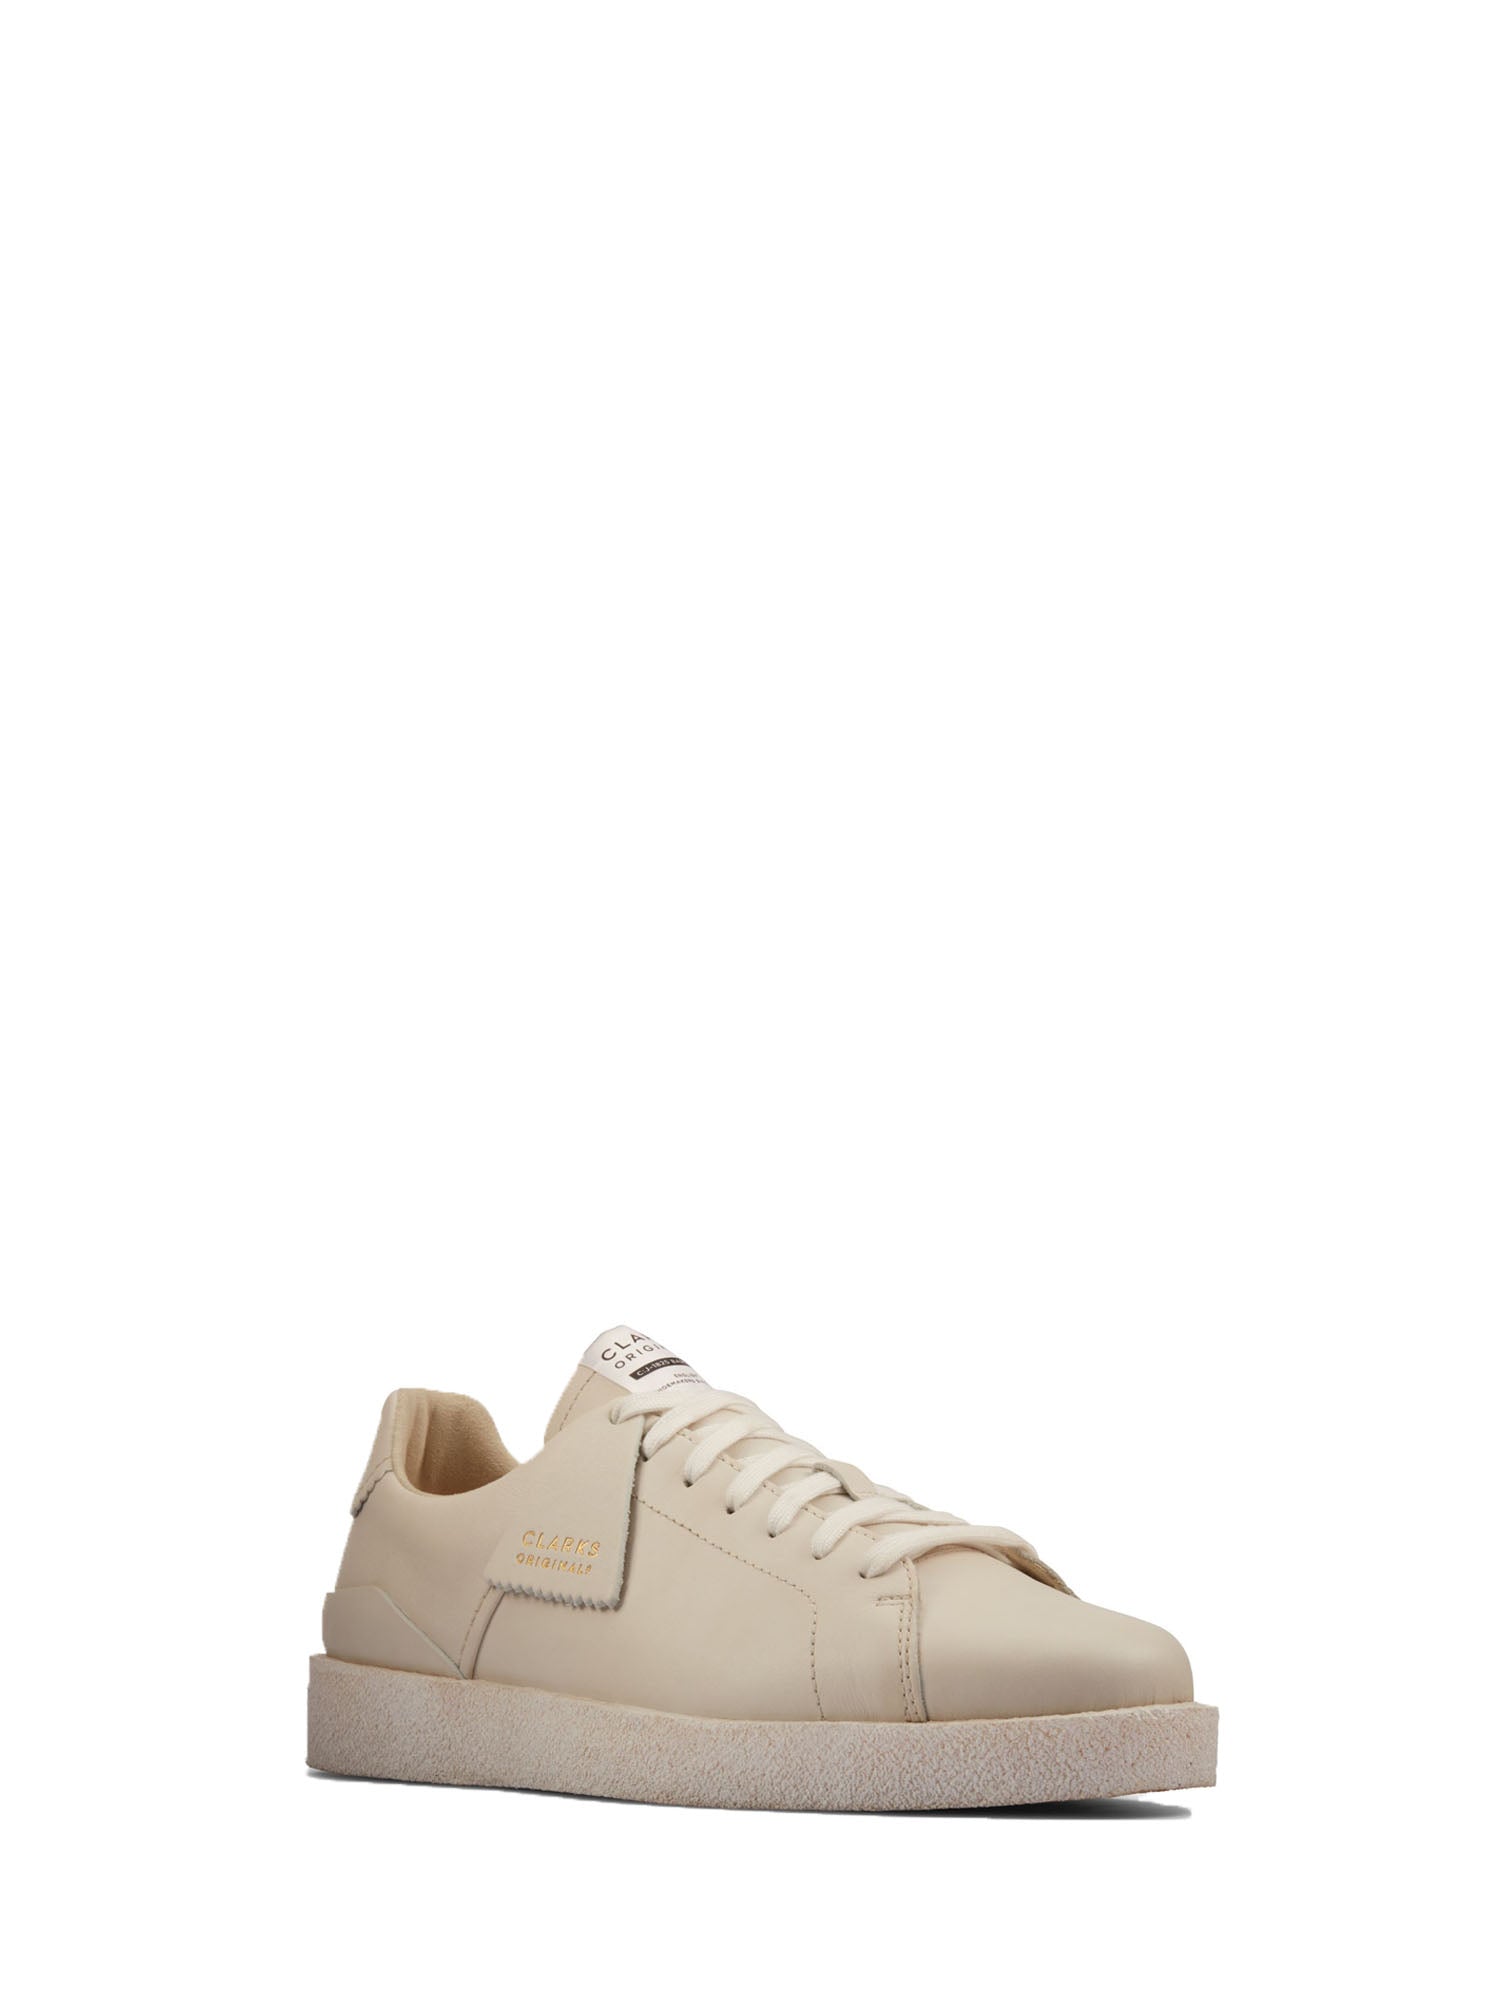 CLARKS SNEAKERS TORMATCH WHITE LEATHER